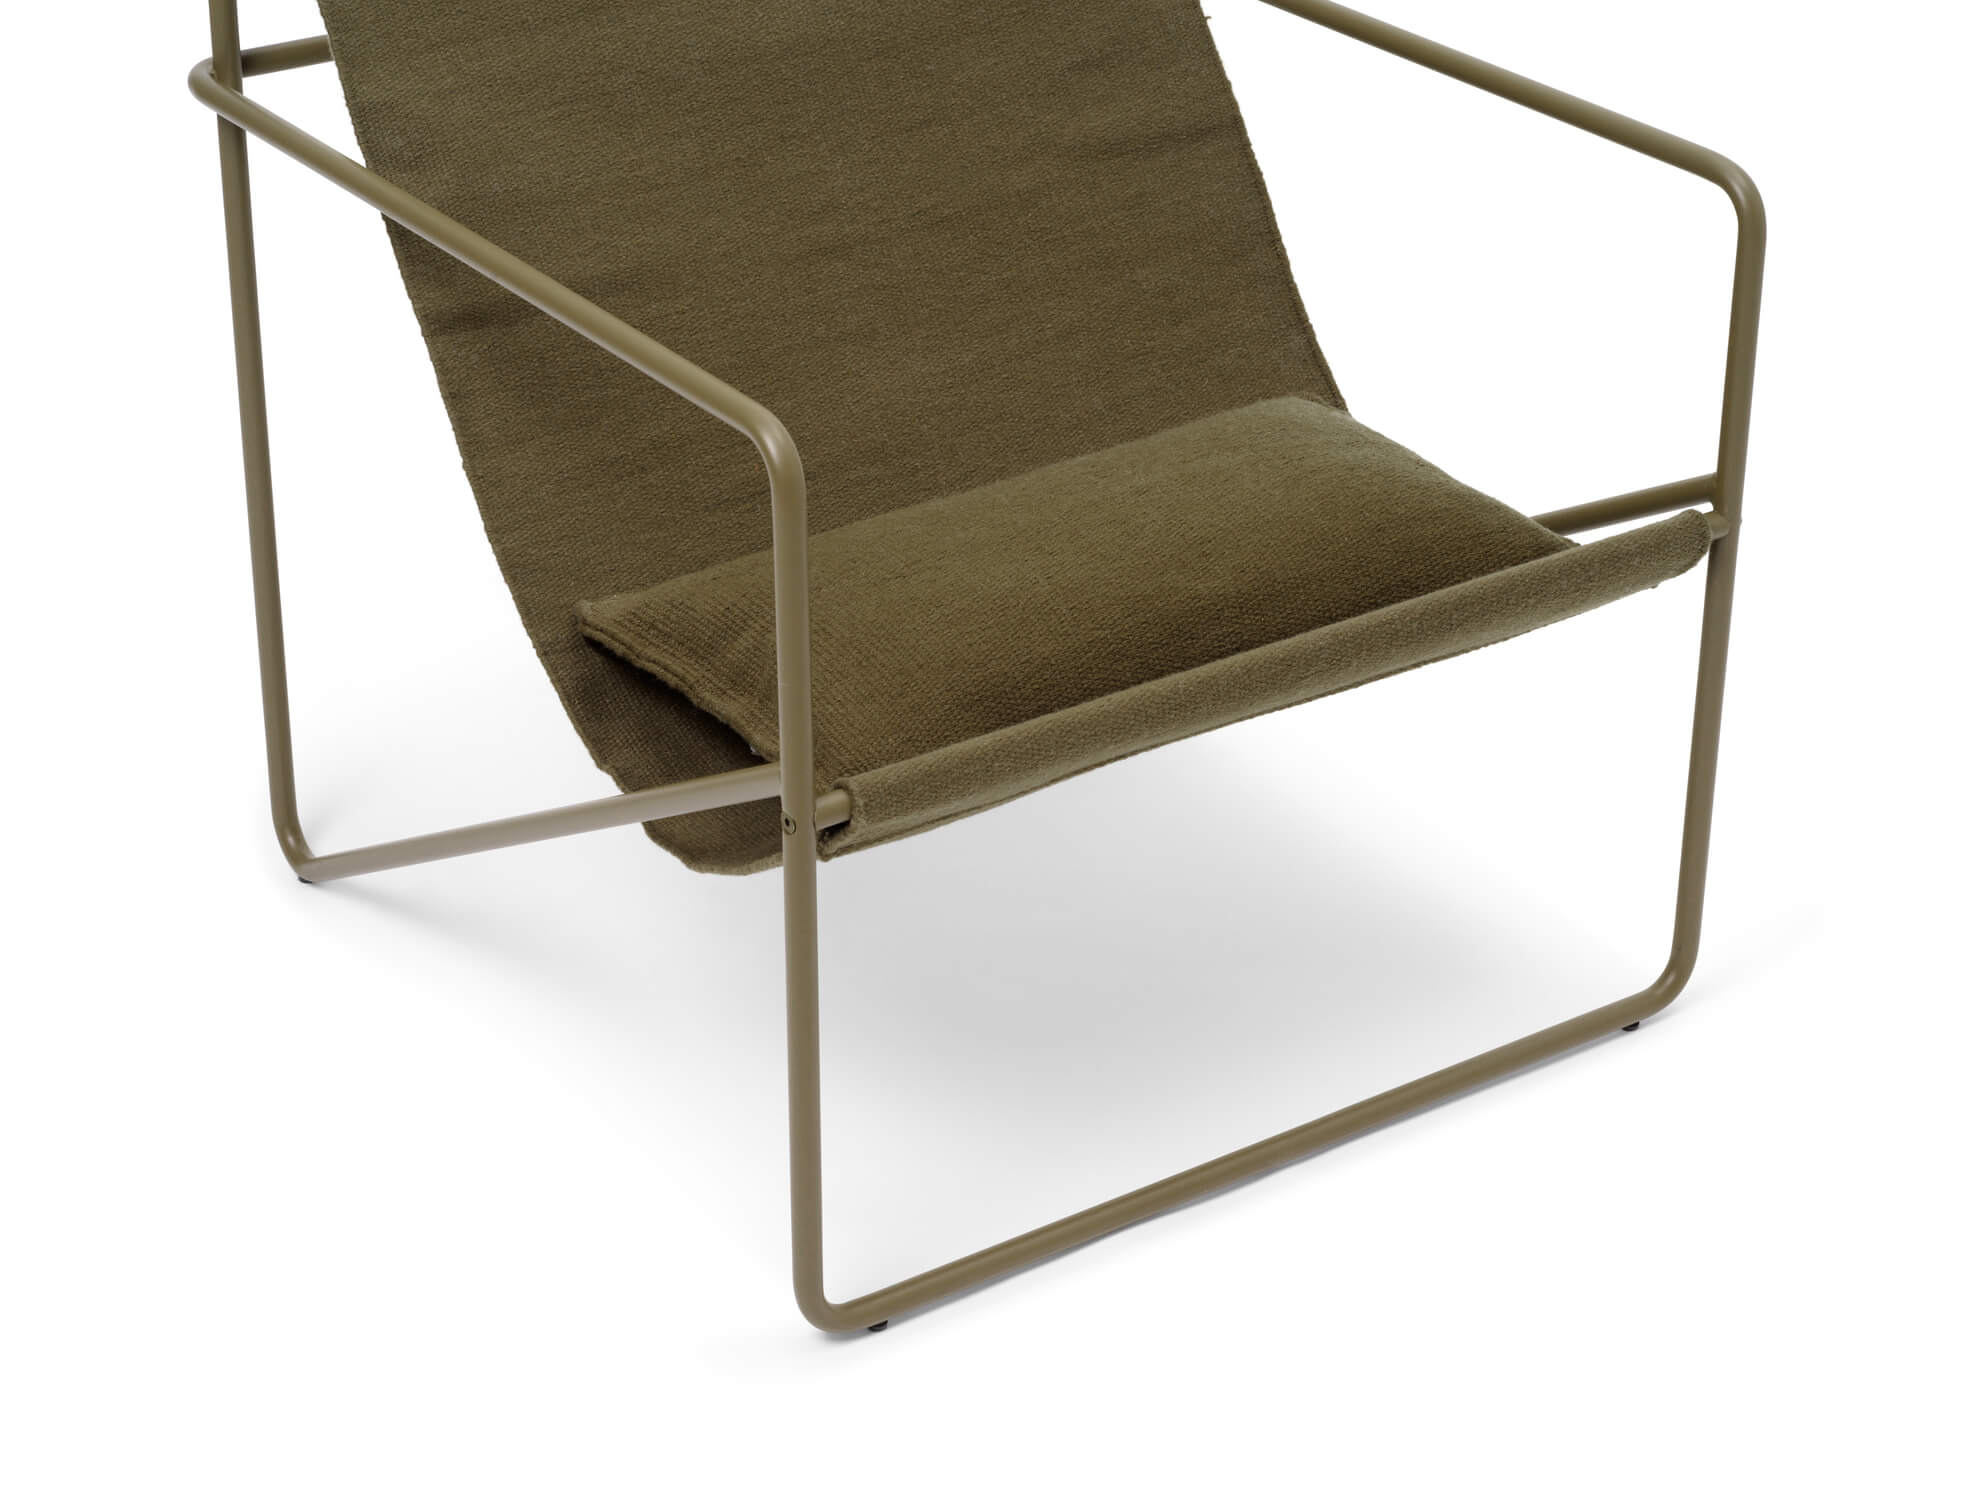 Desert Lounge Chair | Olive Frame + Olive Fabric | by ferm Living - Lifestory - ferm Living